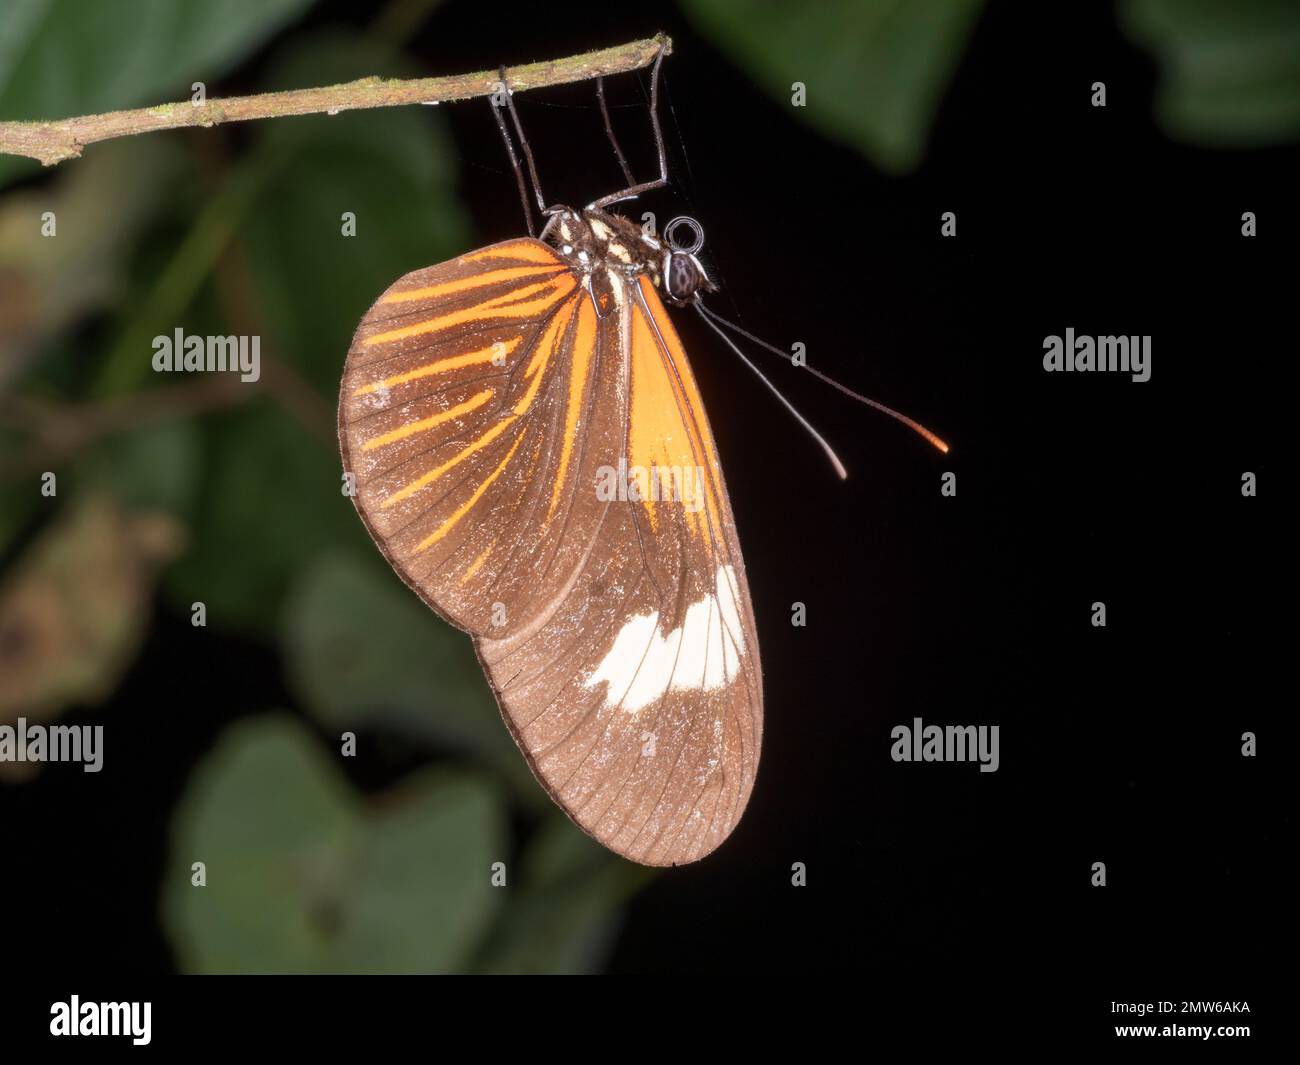 Postman butterfly (Heliconius sp.) roosting upside down in the rainforest understory at night, Orellana province, Ecuador Stock Photo